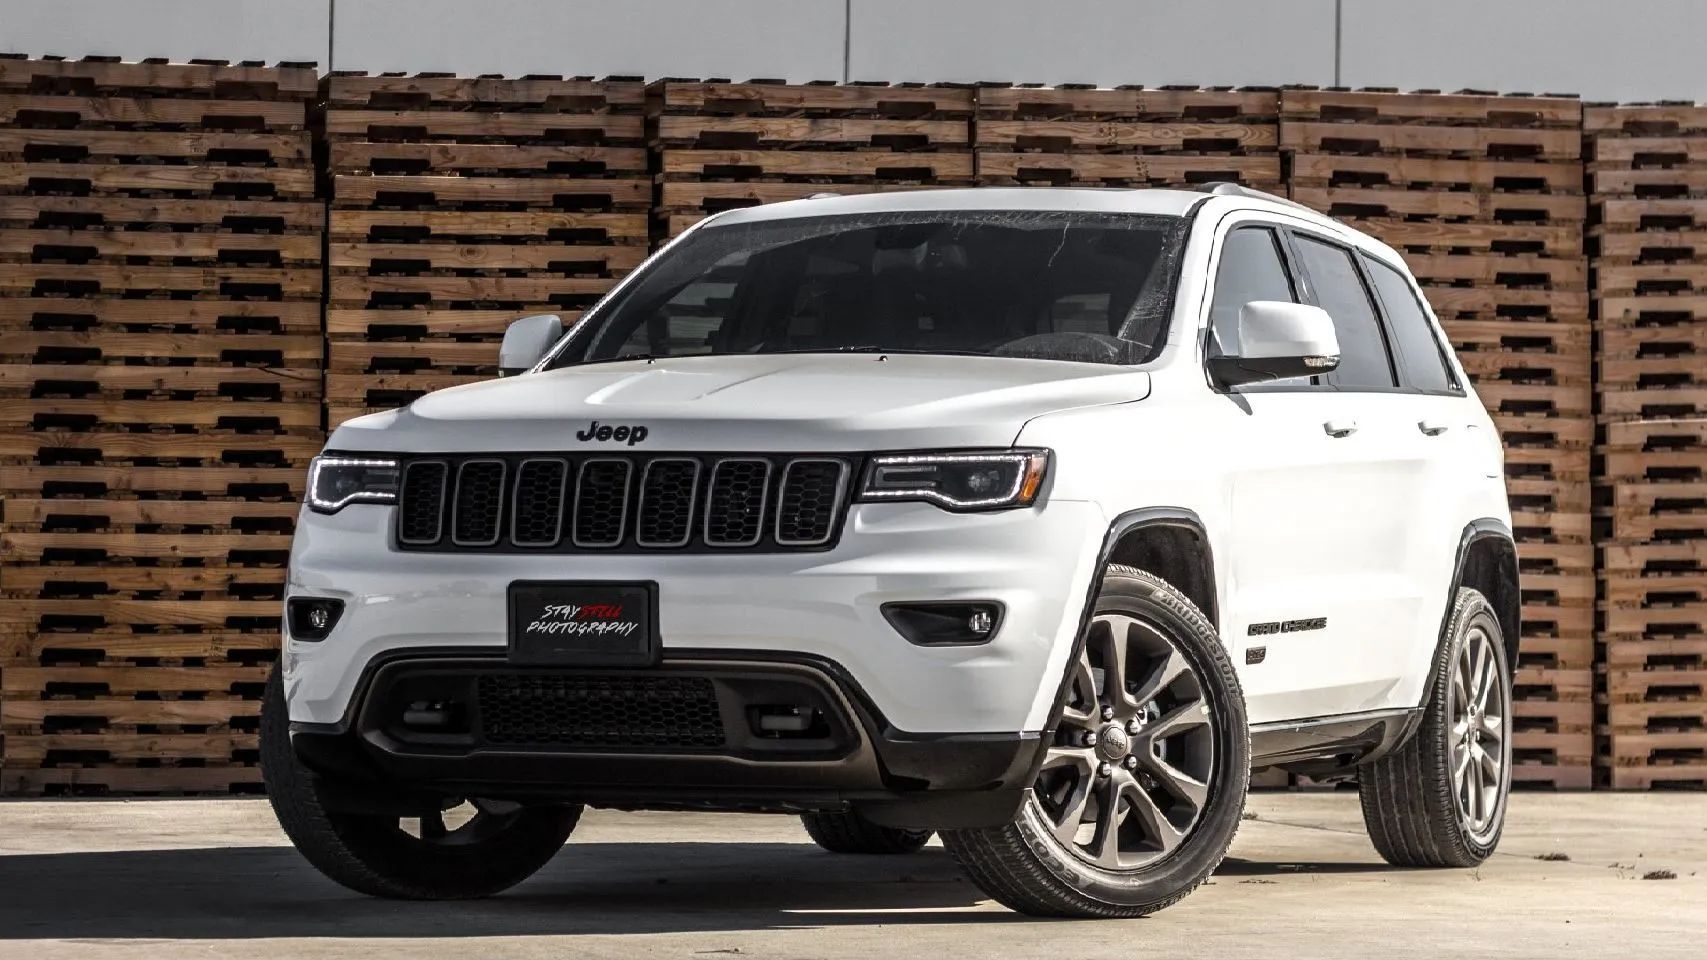 Jeep Repair and Services at ﻿Guy's Automotive﻿ in ﻿North Tampa and Tampa, FL﻿